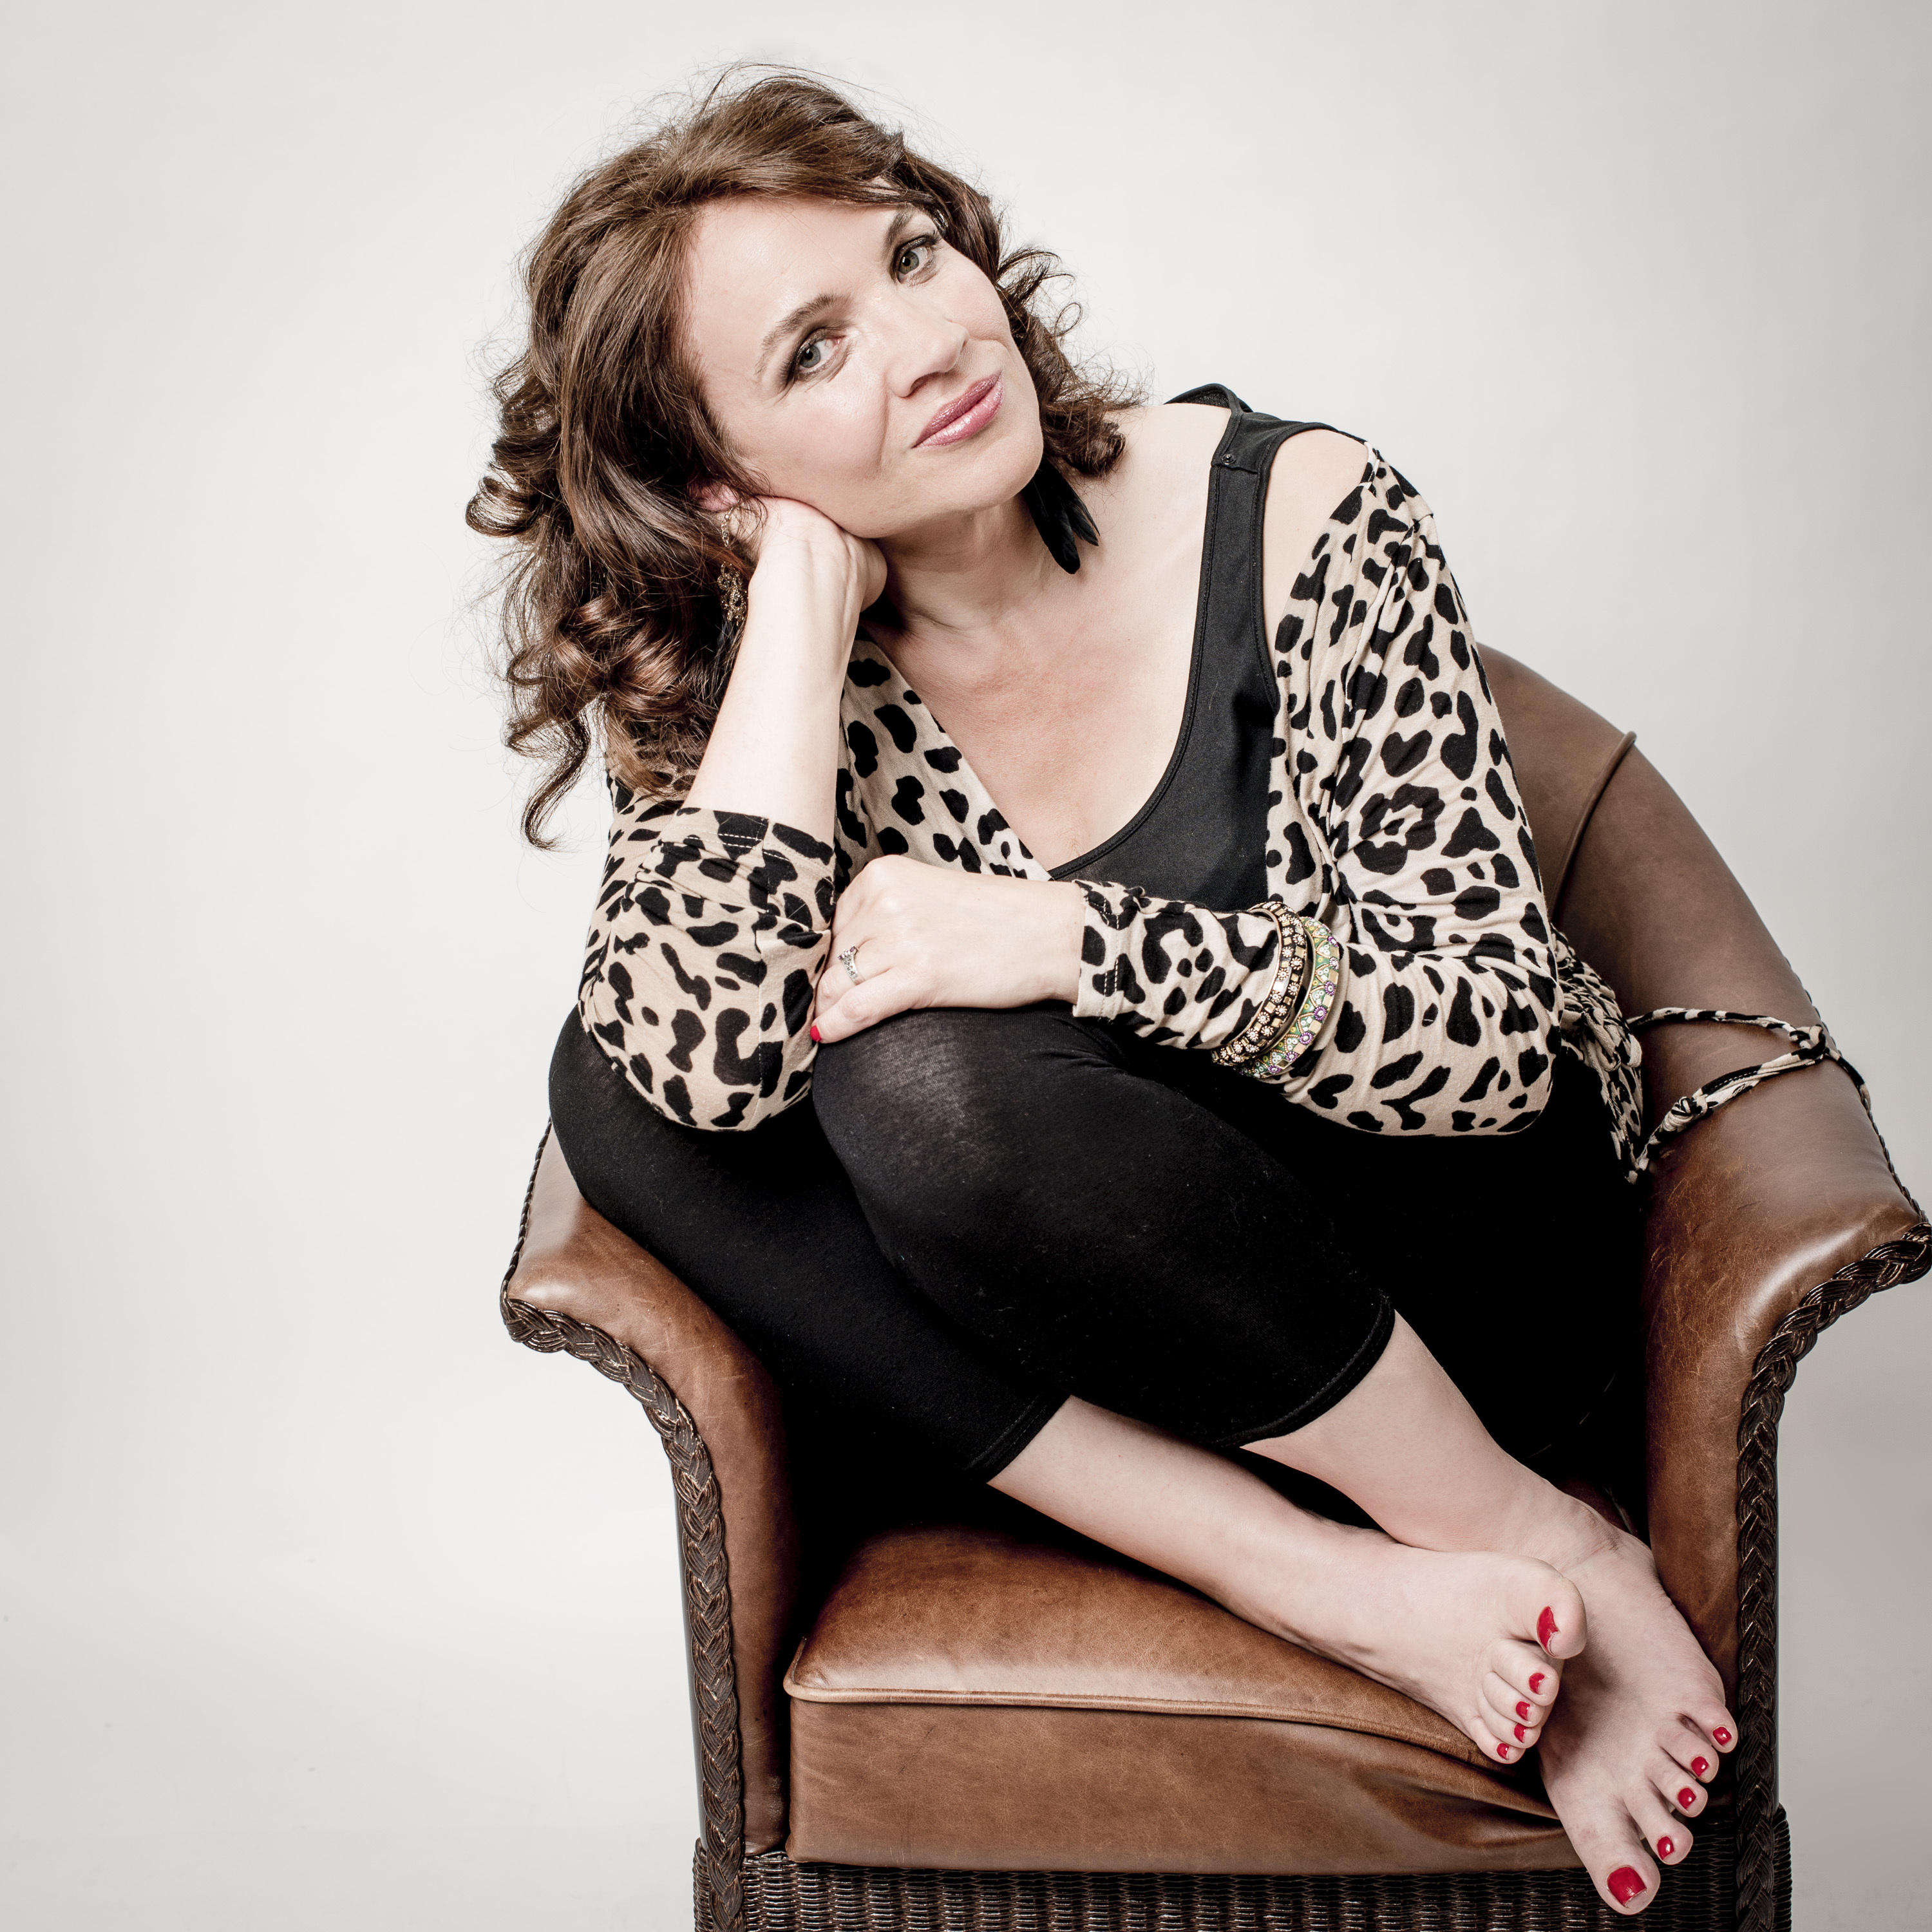 Image of Jacqui Dankworth sat with her legs tucked up on a brown leather chair with her head titled resting on her hand. She looks towards the camera. She is wearing a leopard print cardigan and black top. Her hair is shoulder length and curly.